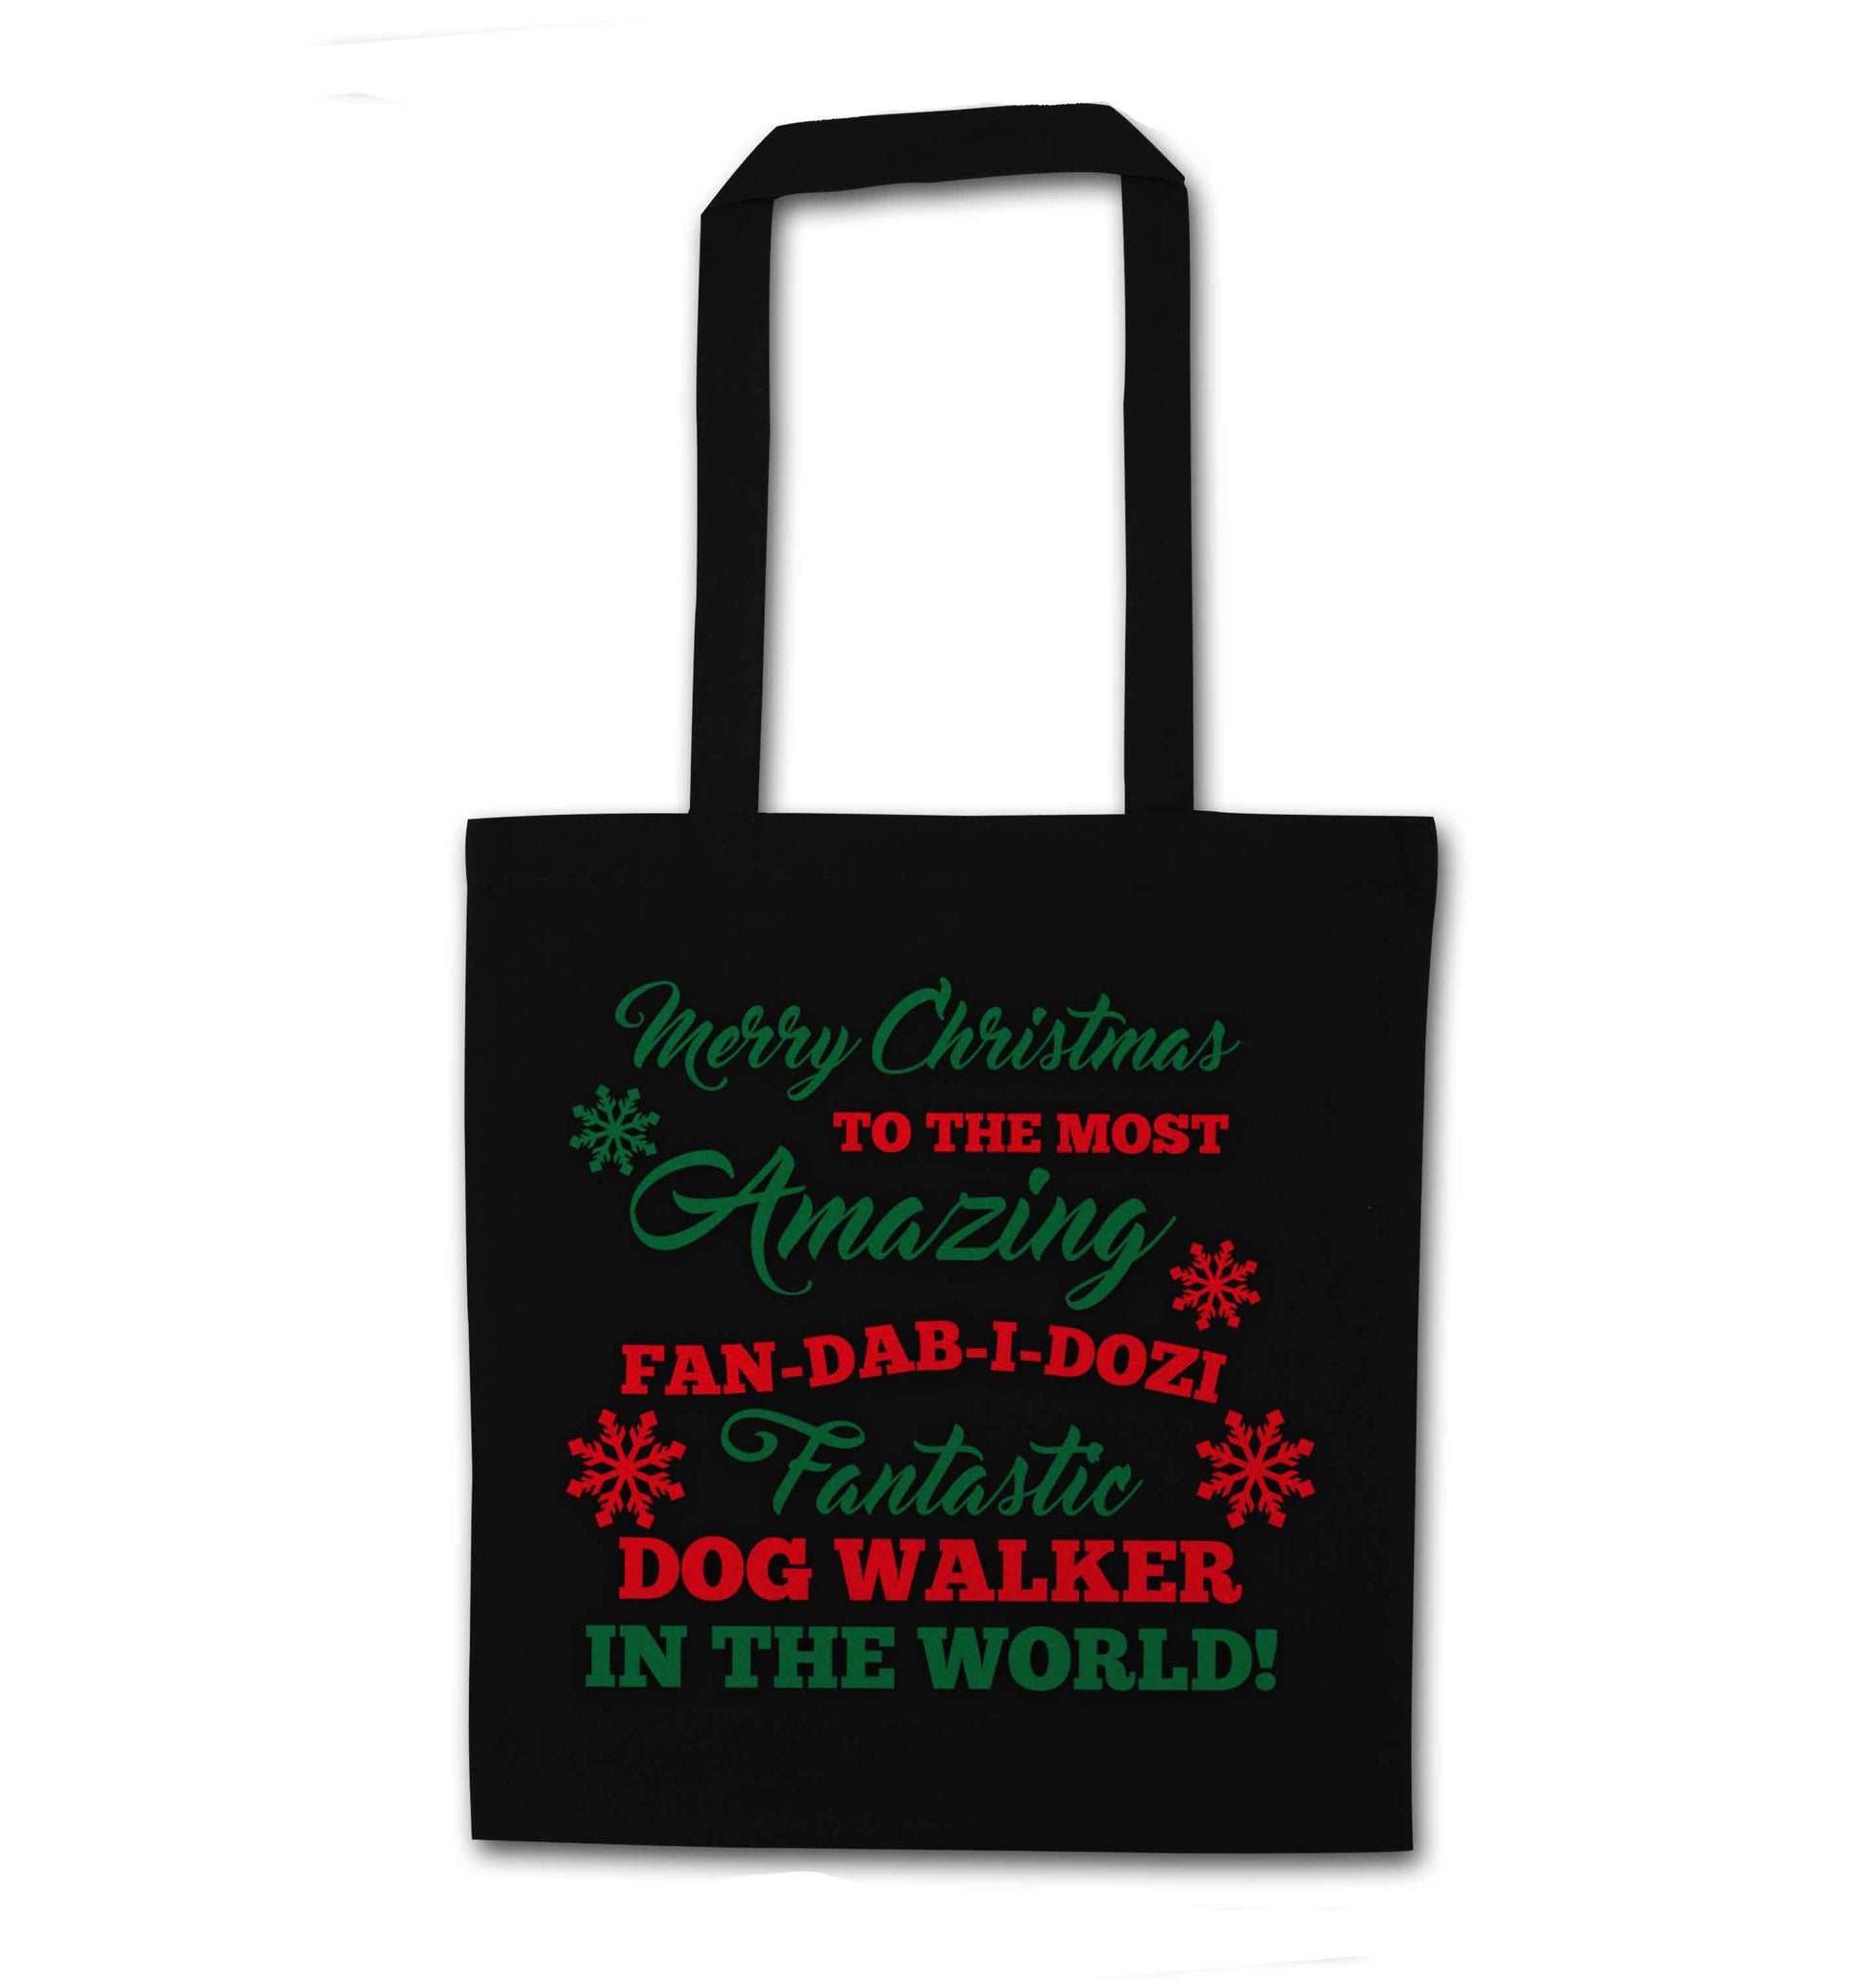 Merry Christmas to the most amazing fan-dab-i-dozi fantasic dog walker in the world black tote bag